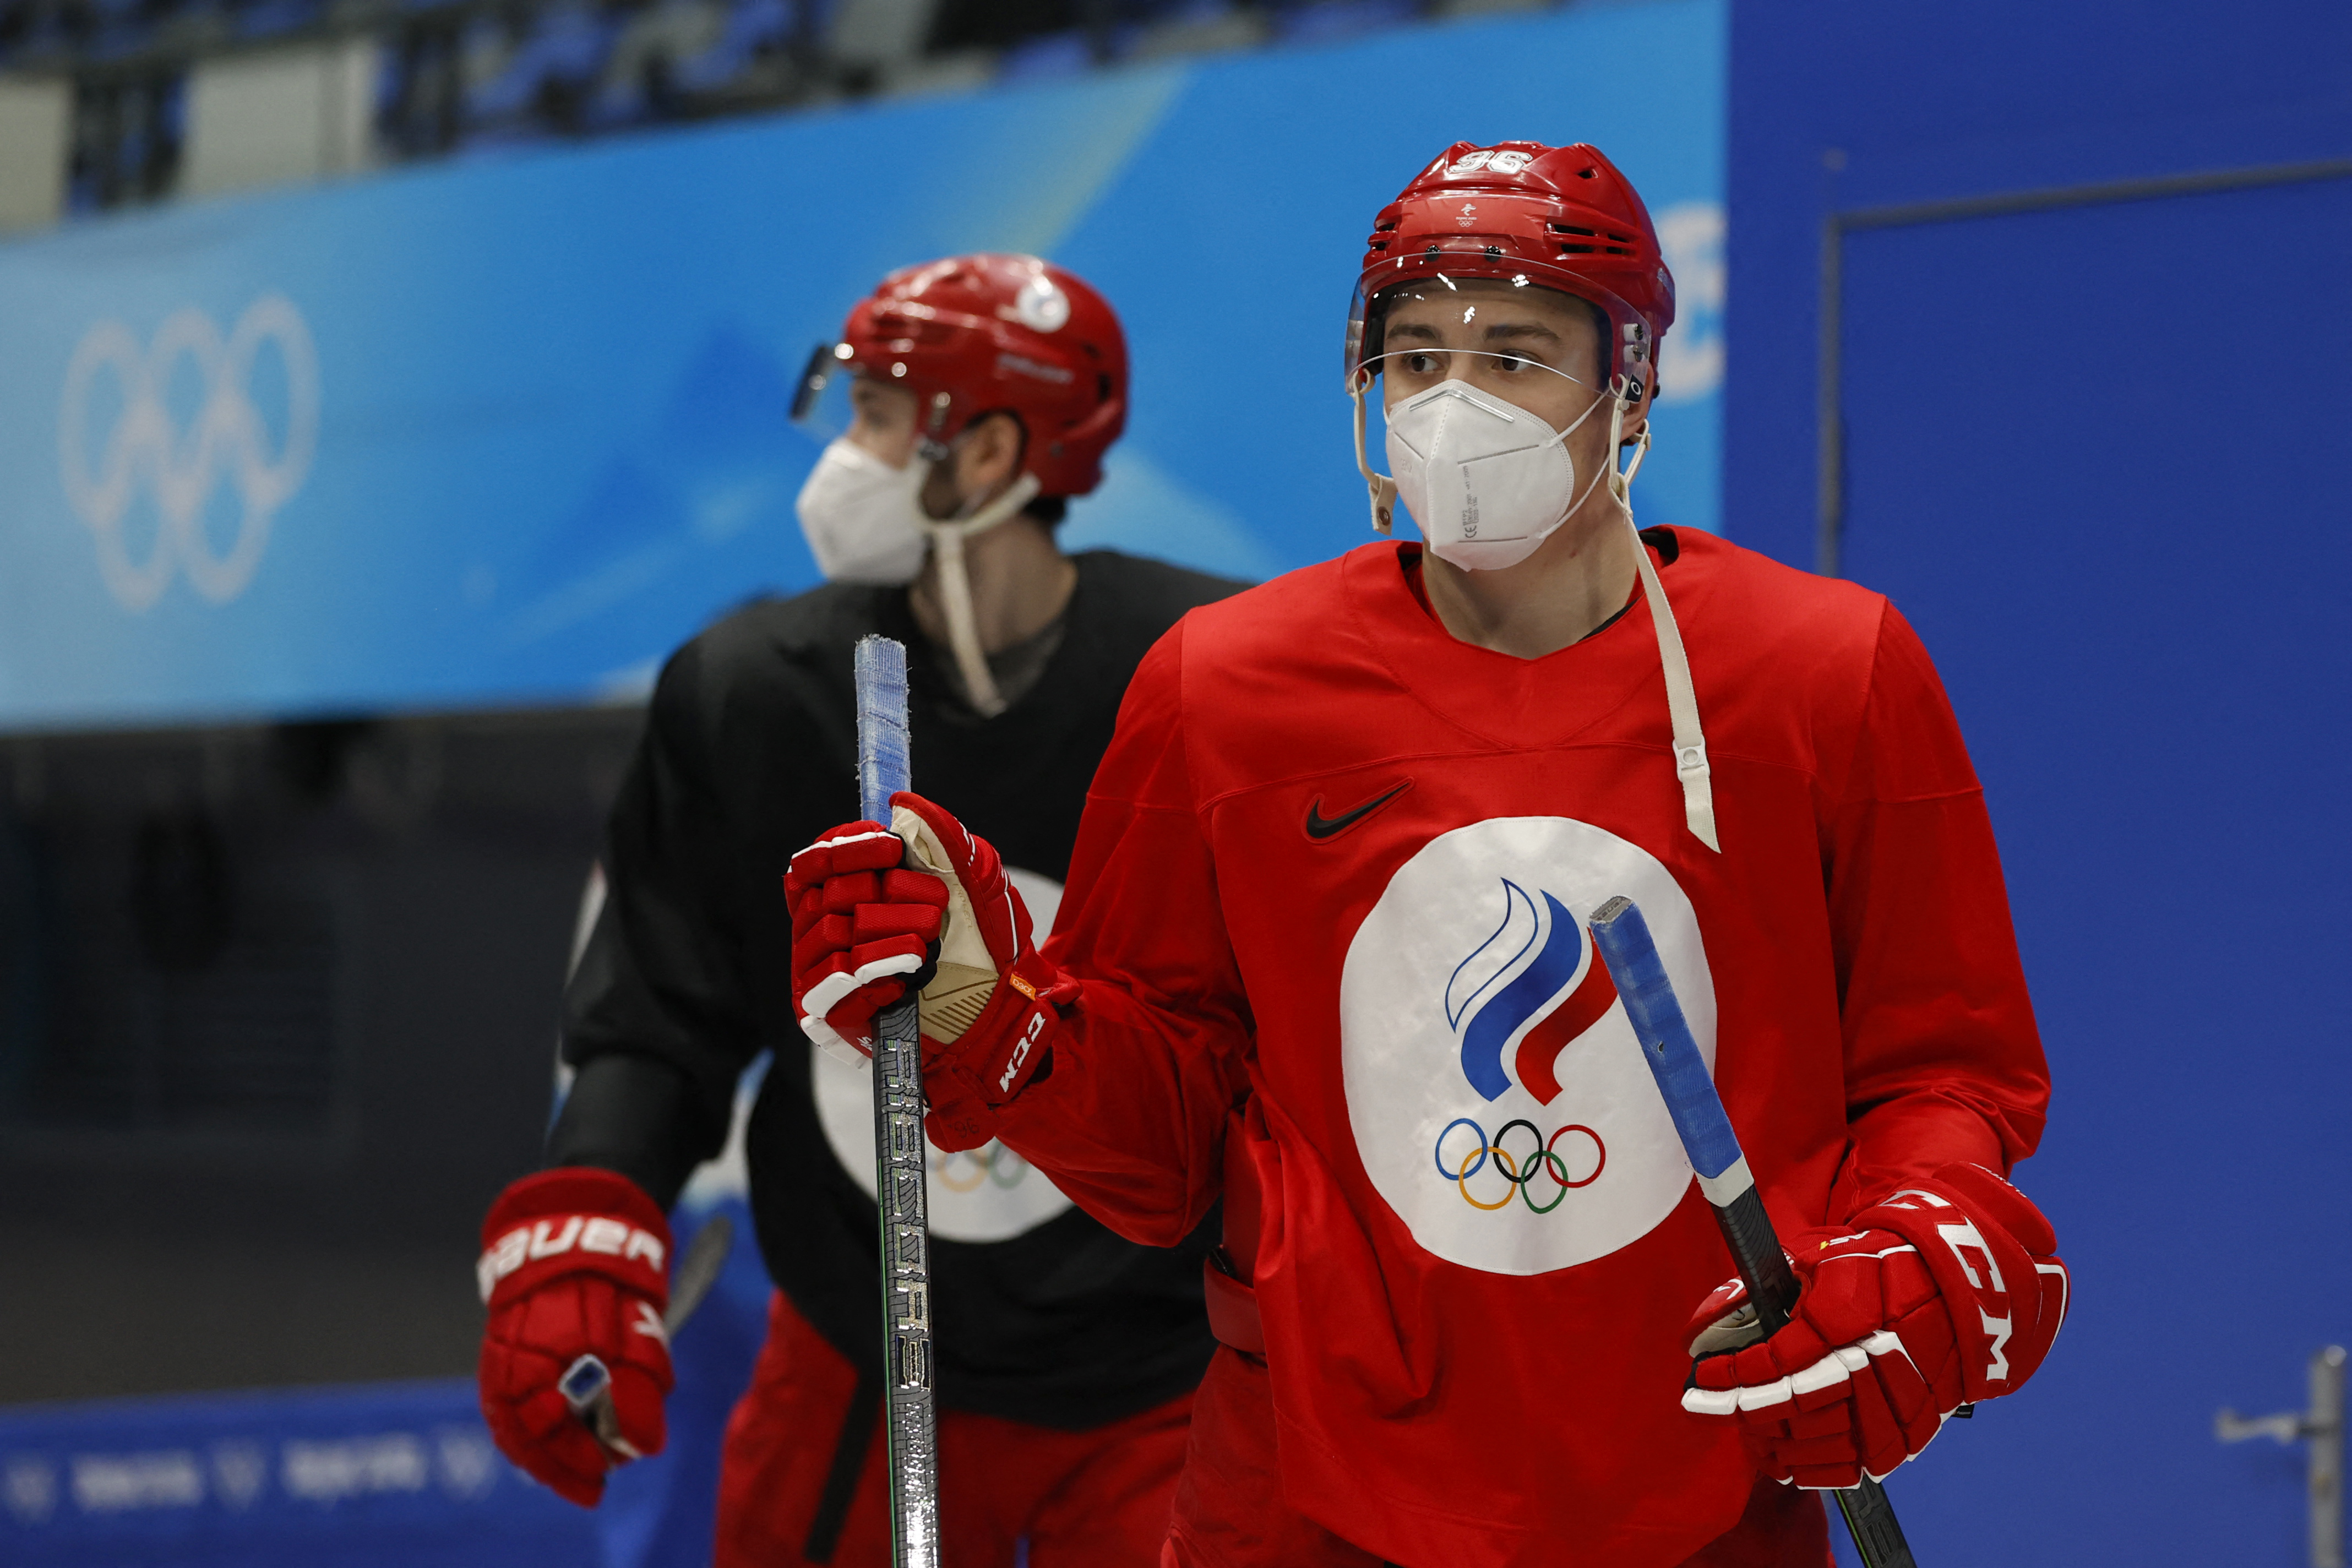 2022 Beijing Olympics - Ice Hockey - Russian Olympic Committee Men's Training - National Indoor Stadium, Beijing, China - February 6, 2022. Russia athletes wearing protective face masks arrive for training. REUTERS/David W Cerny